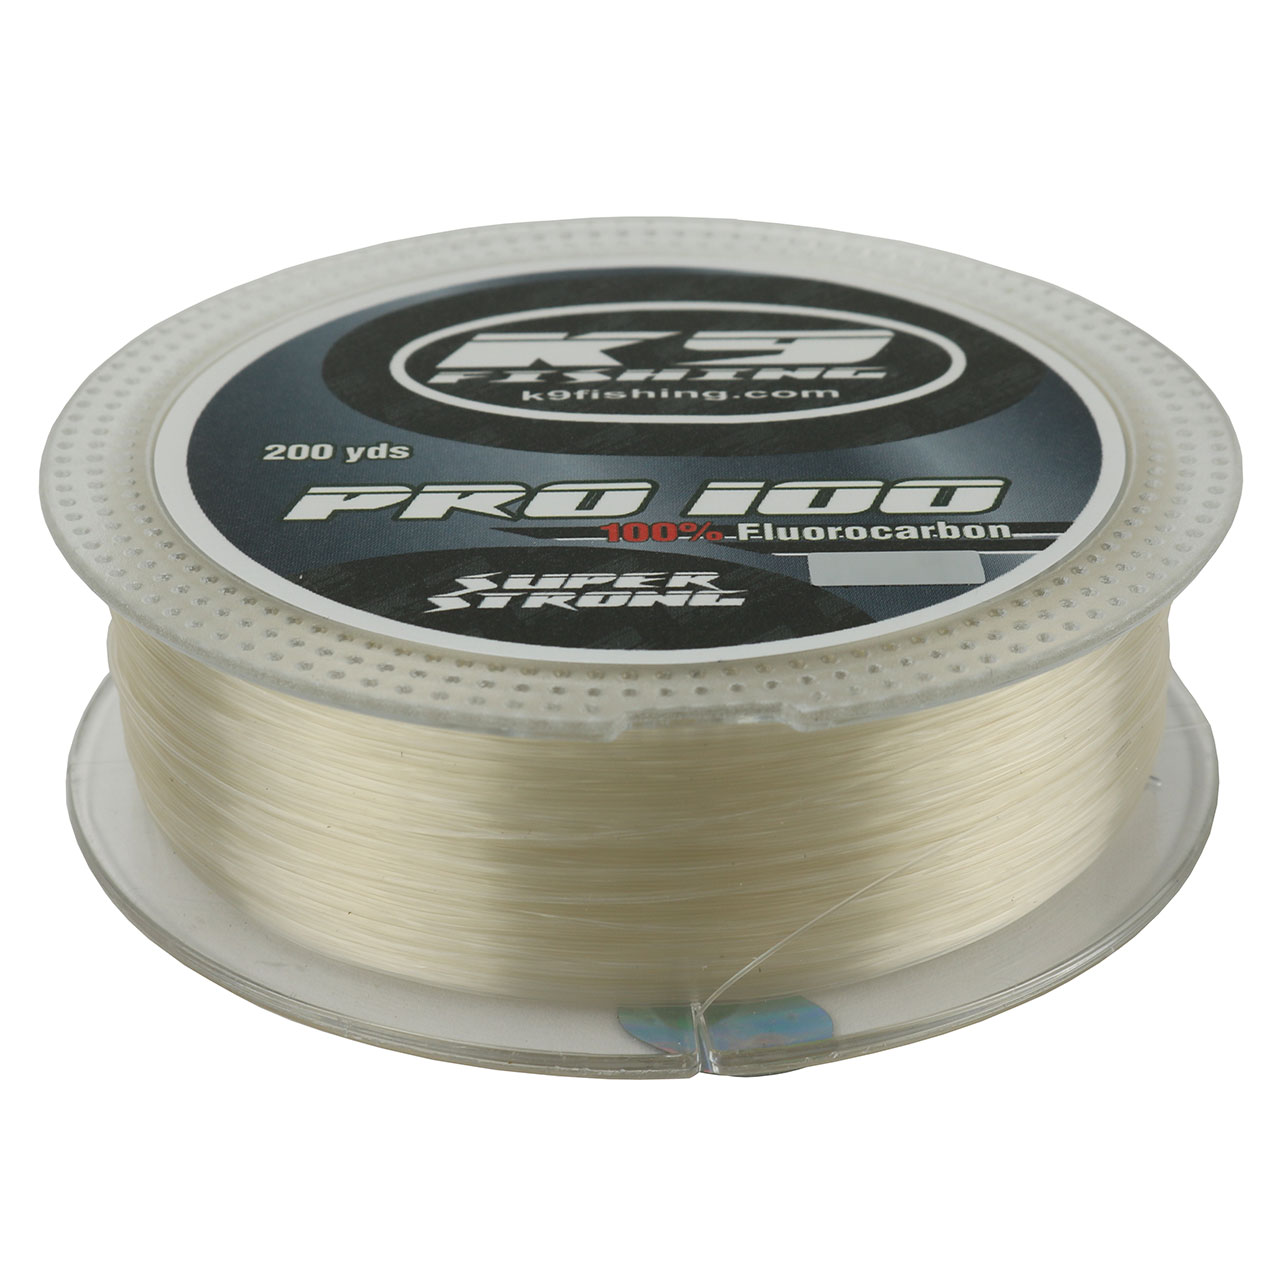 K9 Fluorocarbon Reviews  Chattanooga Fishing Forum